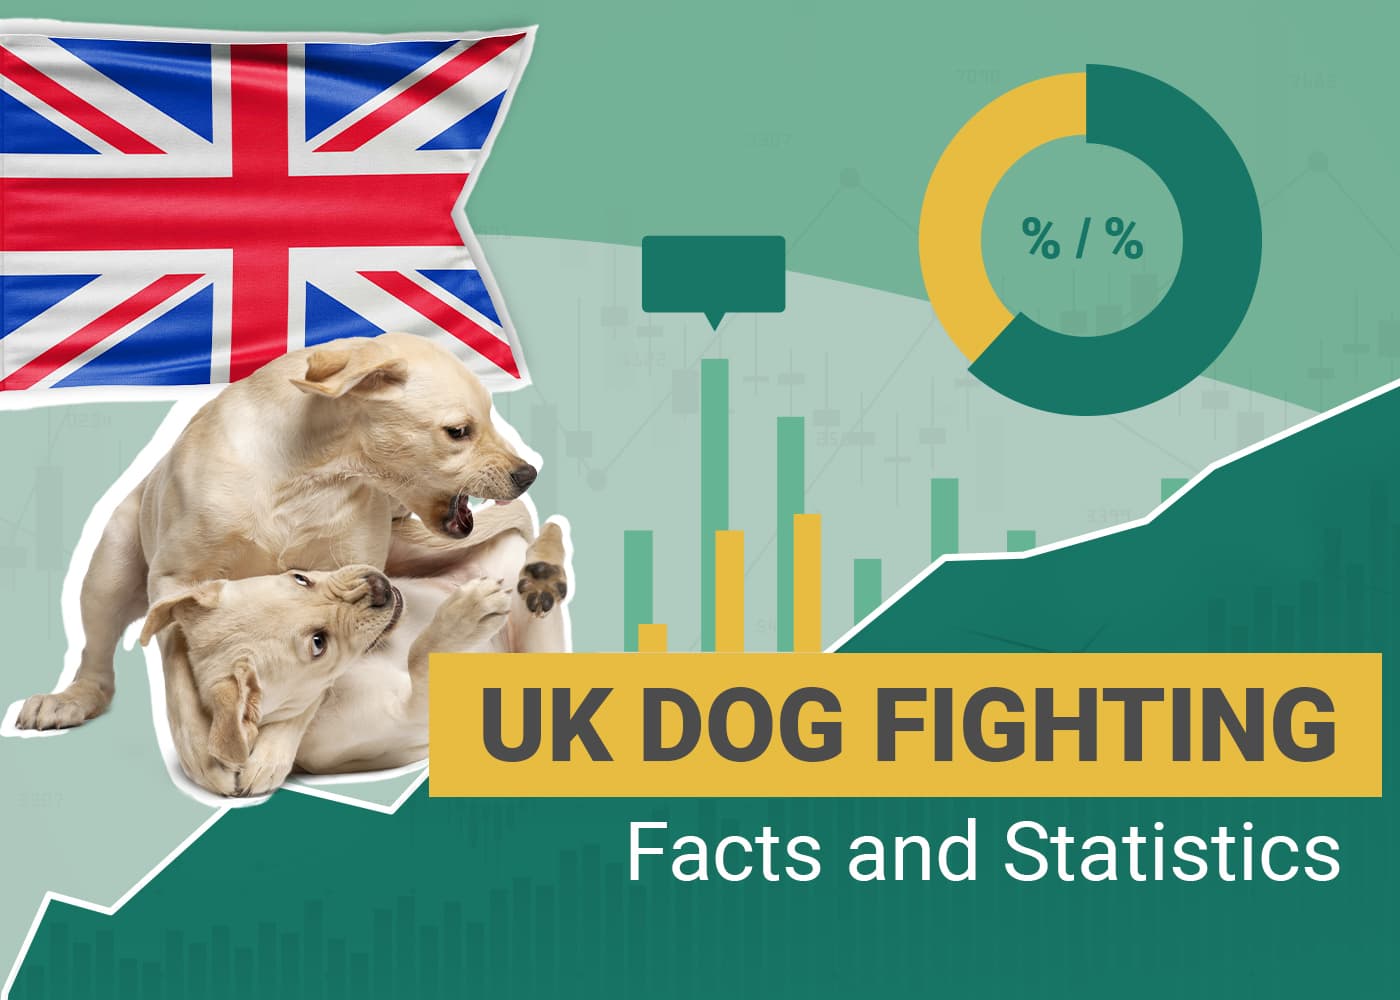 UK Dog Fighting Facts and Statistics